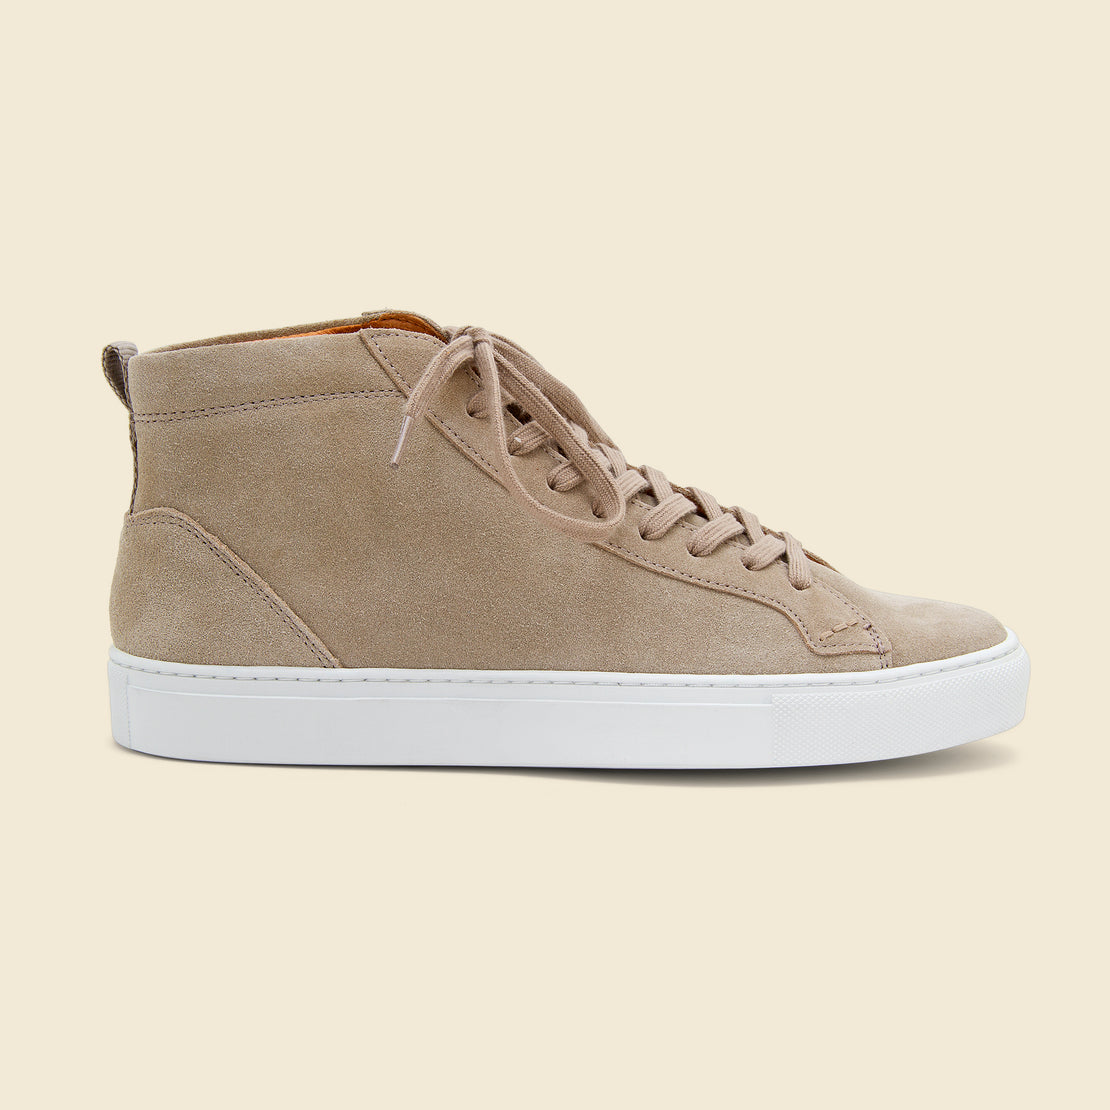 Shoe the Bear Holmes Suede High Top Sneaker - Sand